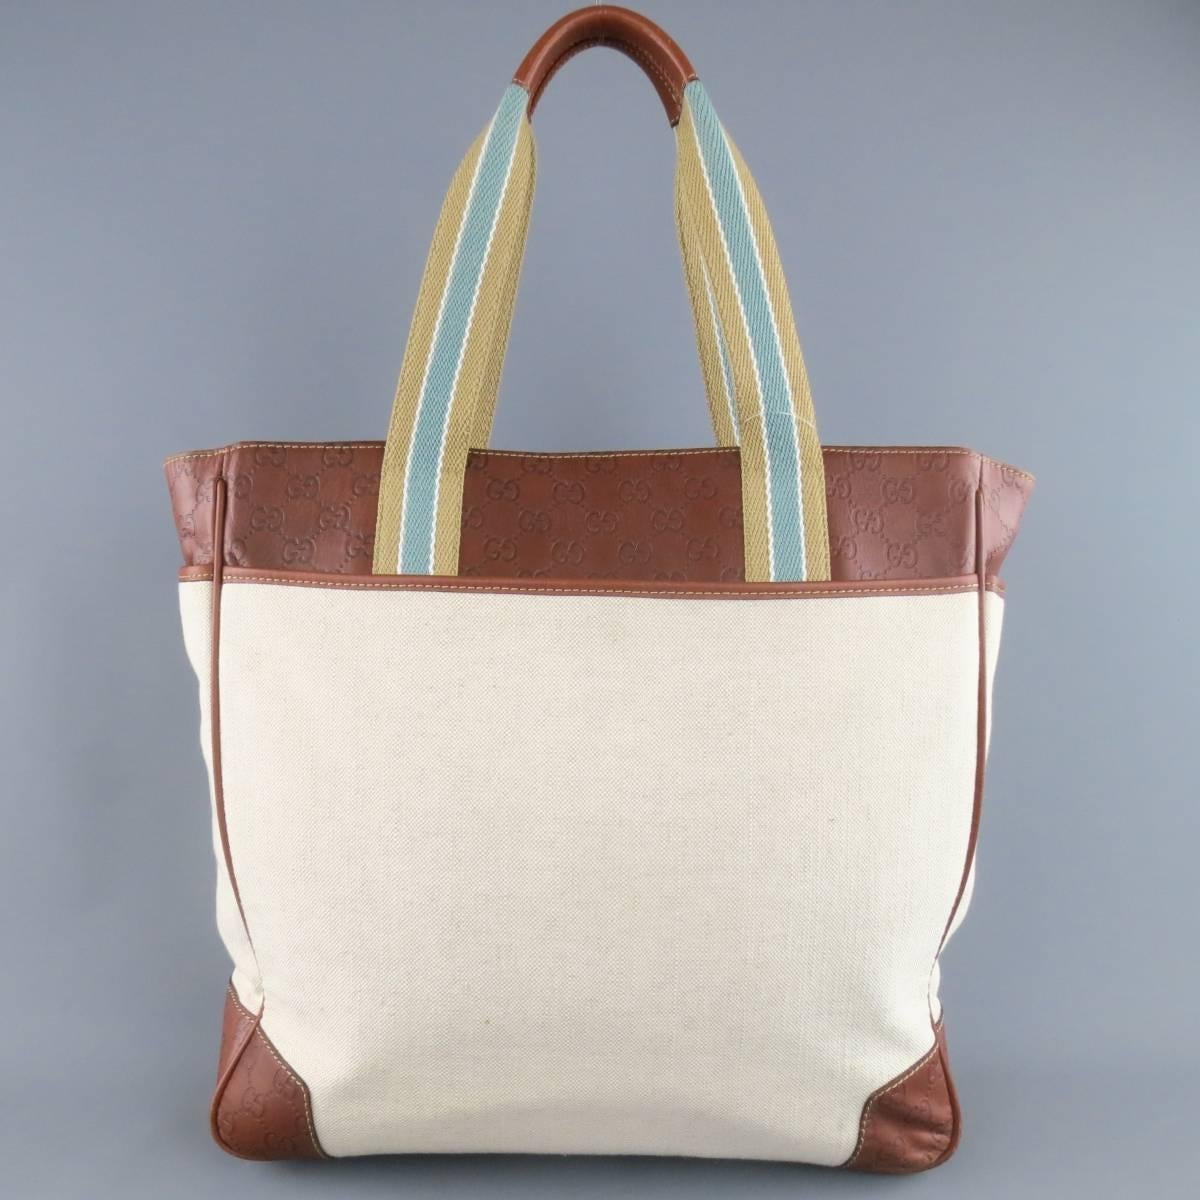 GUCCI Beige Canvas & Guccissima Embossed Leather Tote Bag 2